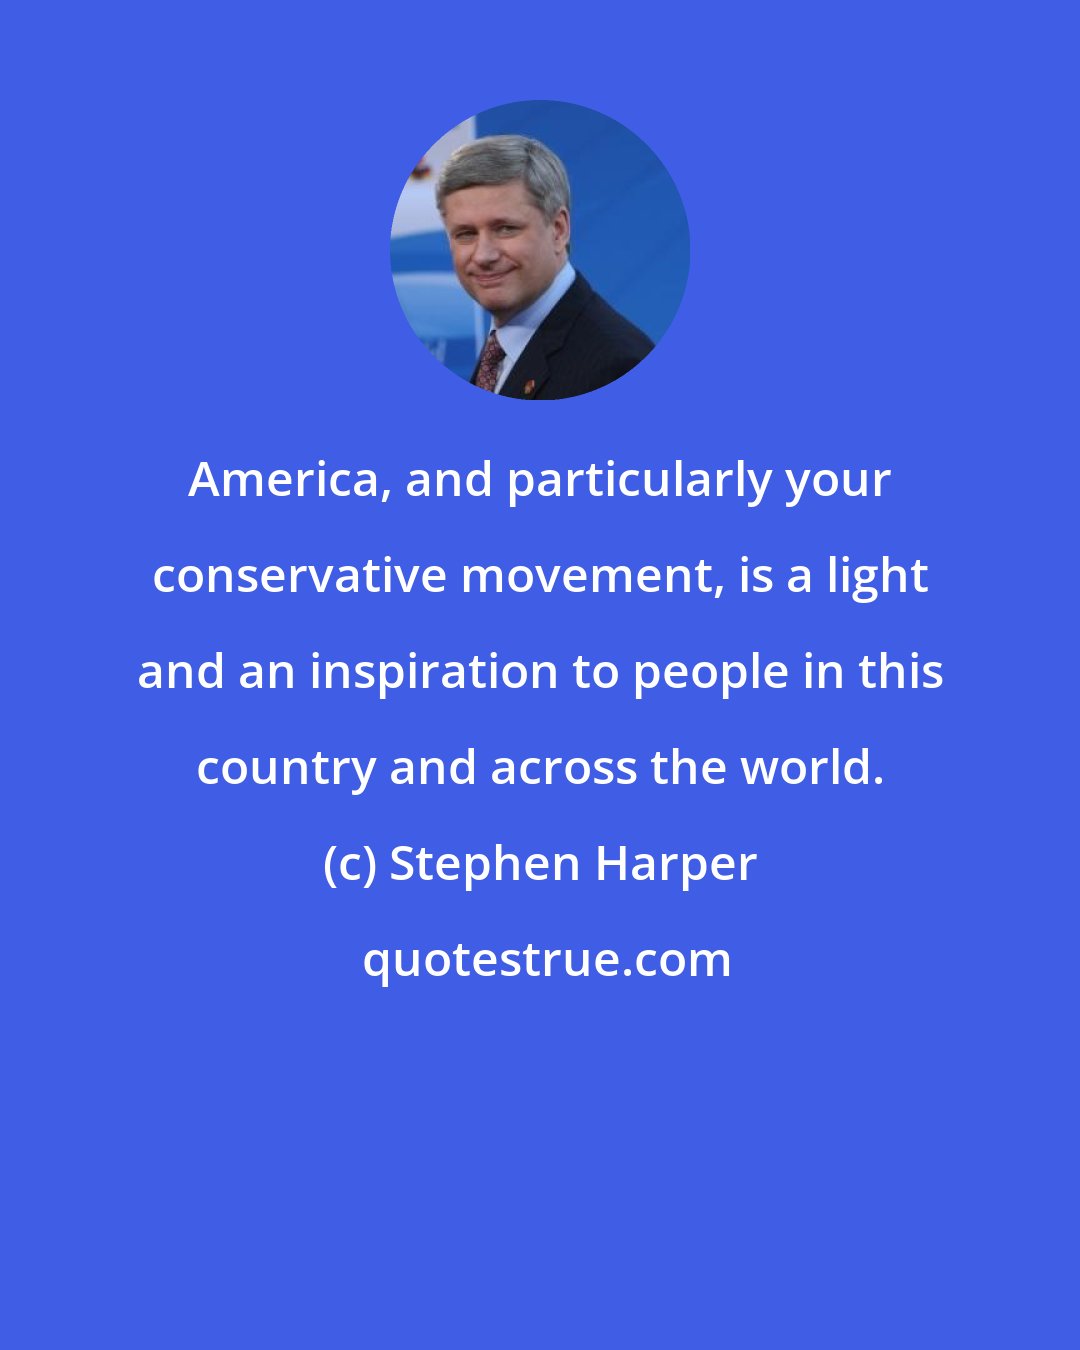 Stephen Harper: America, and particularly your conservative movement, is a light and an inspiration to people in this country and across the world.